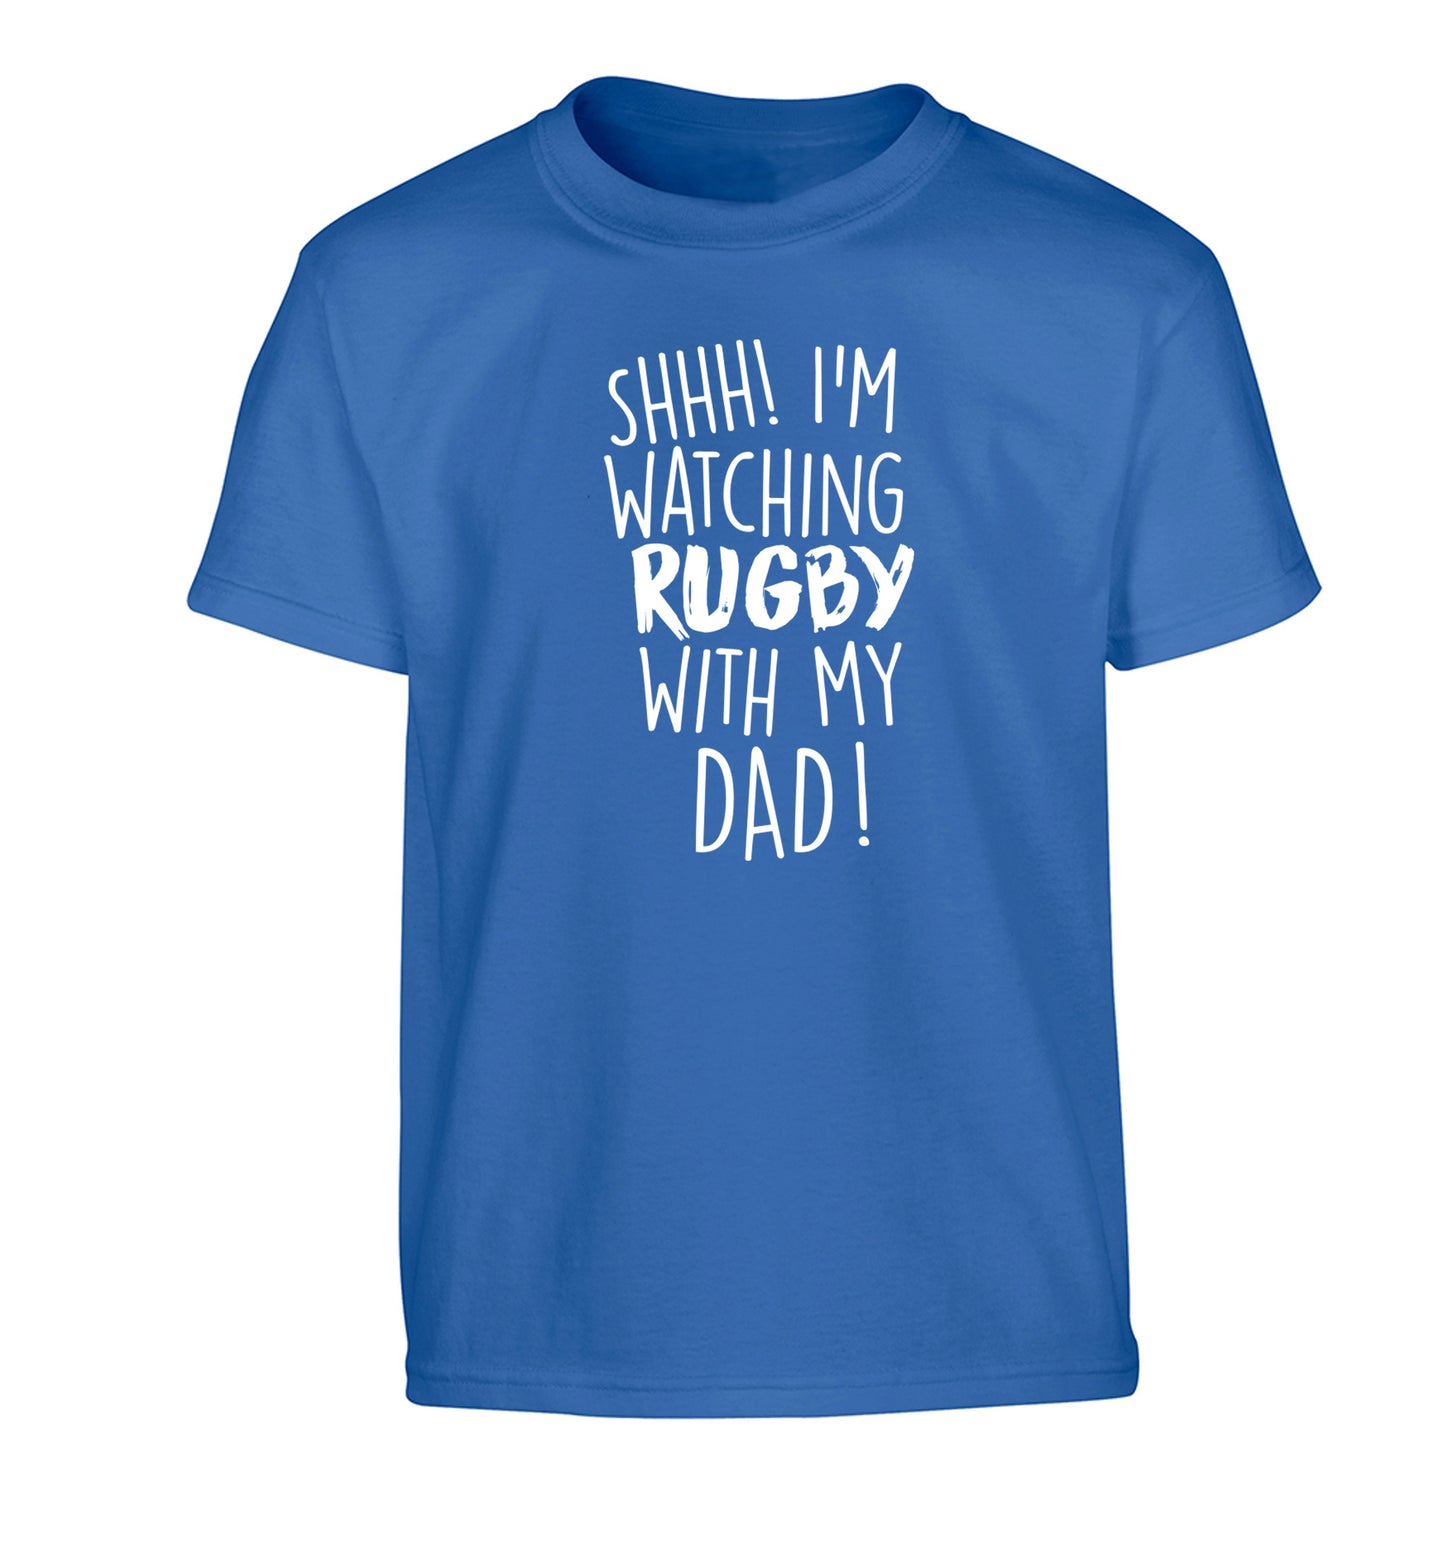 Shh... I'm watching rugby with my dad Children's blue Tshirt 12-13 Years